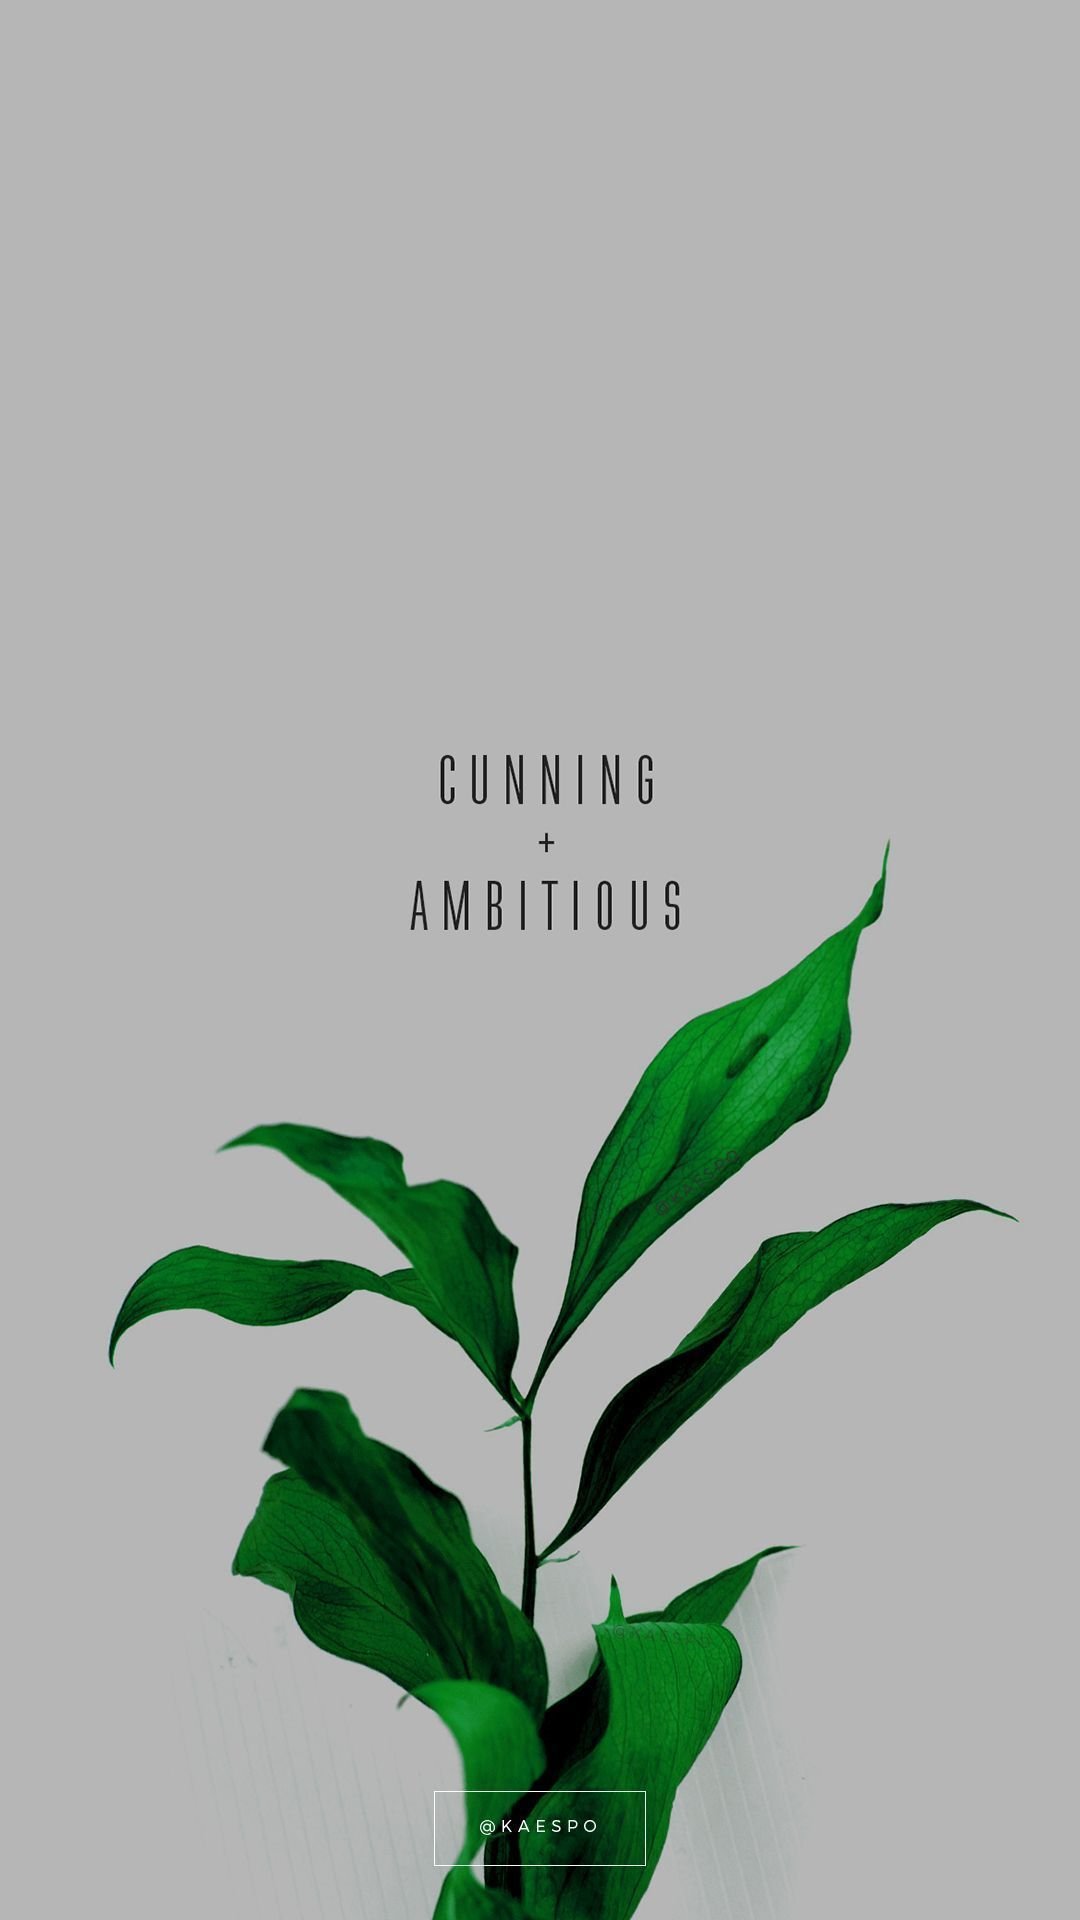 Tropical Plant Aesthetic Art Summer Minimalist Background Wallpaper Image  For Free Download  Pngtree